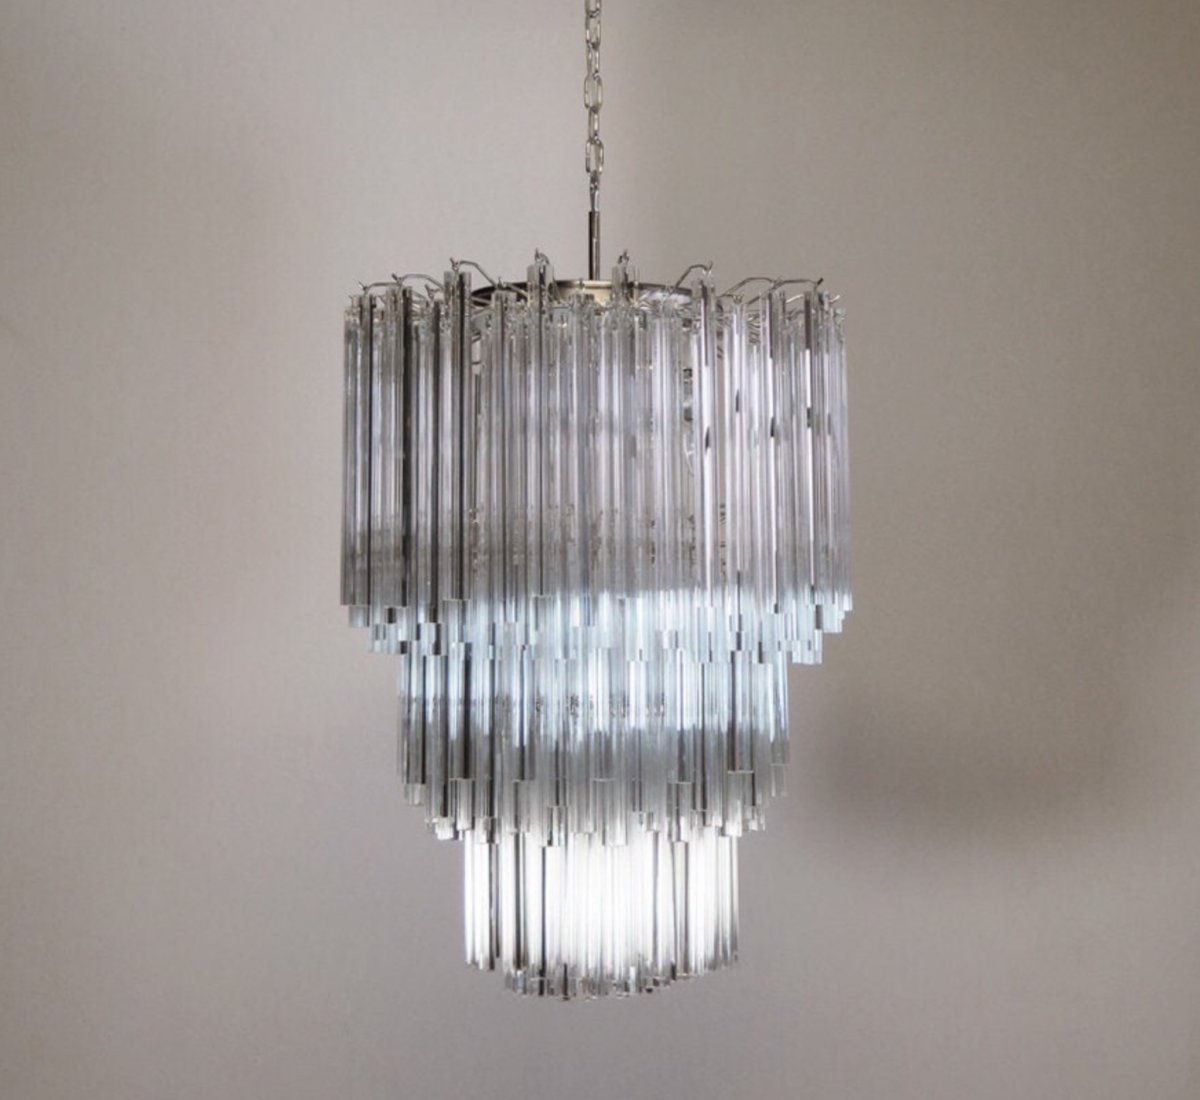 Large Murano Chandelier Including 184 Trihedral Prisms-photo-3